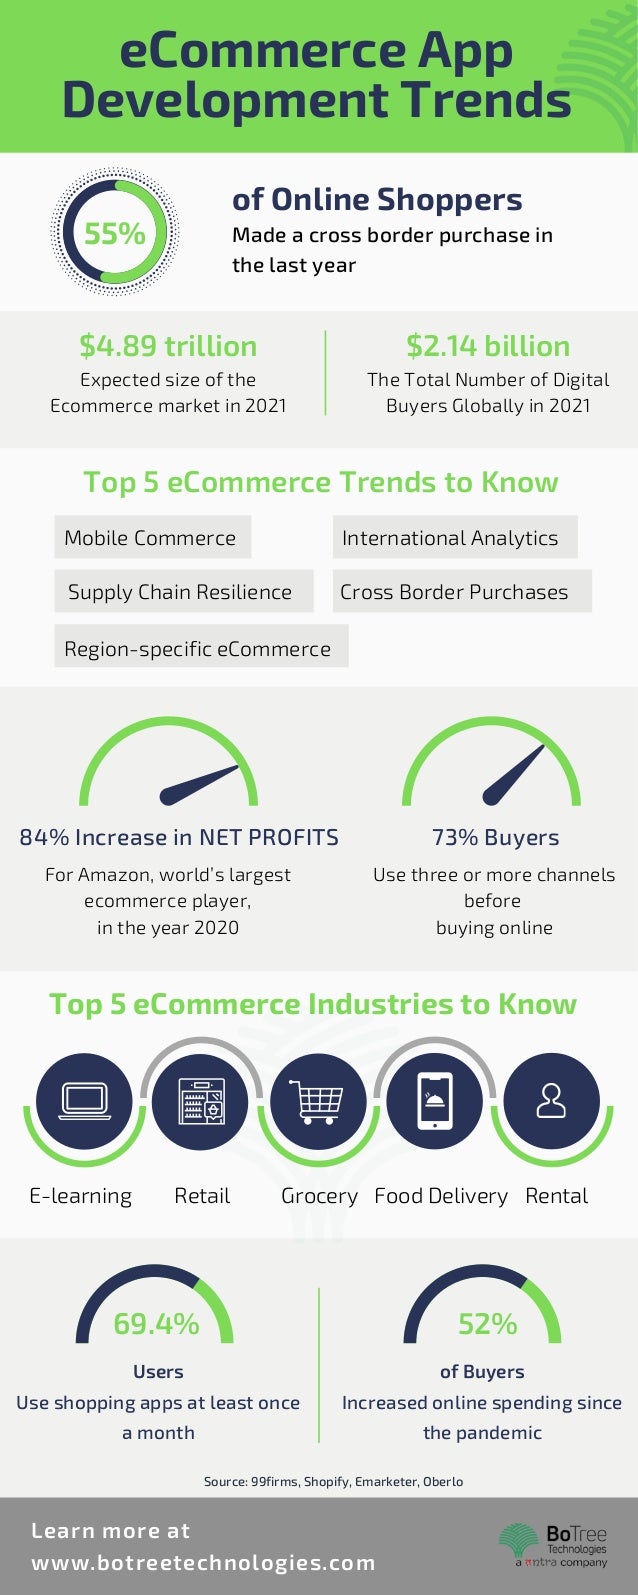 55%
Top 5 eCommerce Industries to Know
Source: 99firms, Shopify, Emarketer, Oberlo
69.4% 52%
Users
Use shopping apps at least once
a month
of Buyers
Increased online spending since
the pandemic
eCommerce App
Development Trends
Learn more at
www.botreetechnologies.com
of Online Shoppers
Made a cross border purchase in
the last year
$4.89 trillion $2.14 billion
Expected size of the
Ecommerce market in 2021
The Total Number of Digital
Buyers Globally in 2021
Top 5 eCommerce Trends to Know
Mobile Commerce
Supply Chain Resilience
International Analytics
Region-specific eCommerce
Cross Border Purchases
84% Increase in NET PROFITS
For Amazon, world’s largest
ecommerce player,
in the year 2020
73% Buyers
Use three or more channels
before
buying online
E-learning Retail Grocery Food Delivery Rental
 